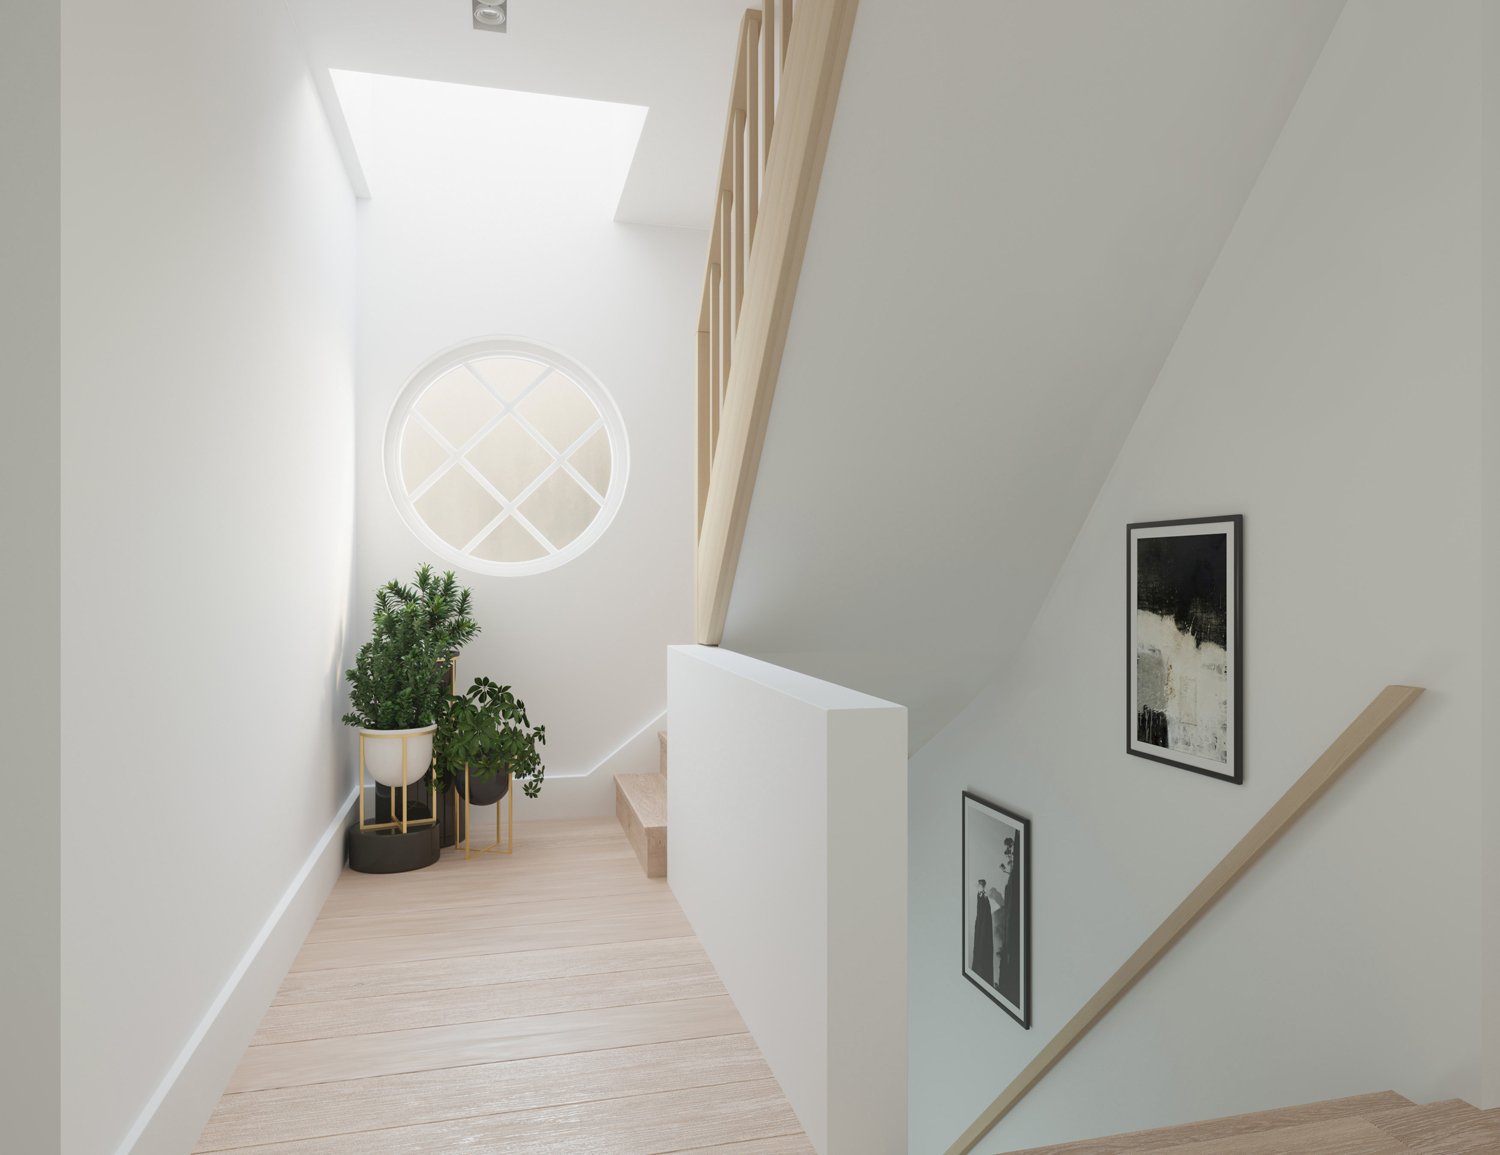 3D-Denmark-2118-Skylights-Small-Spaces-0120-After